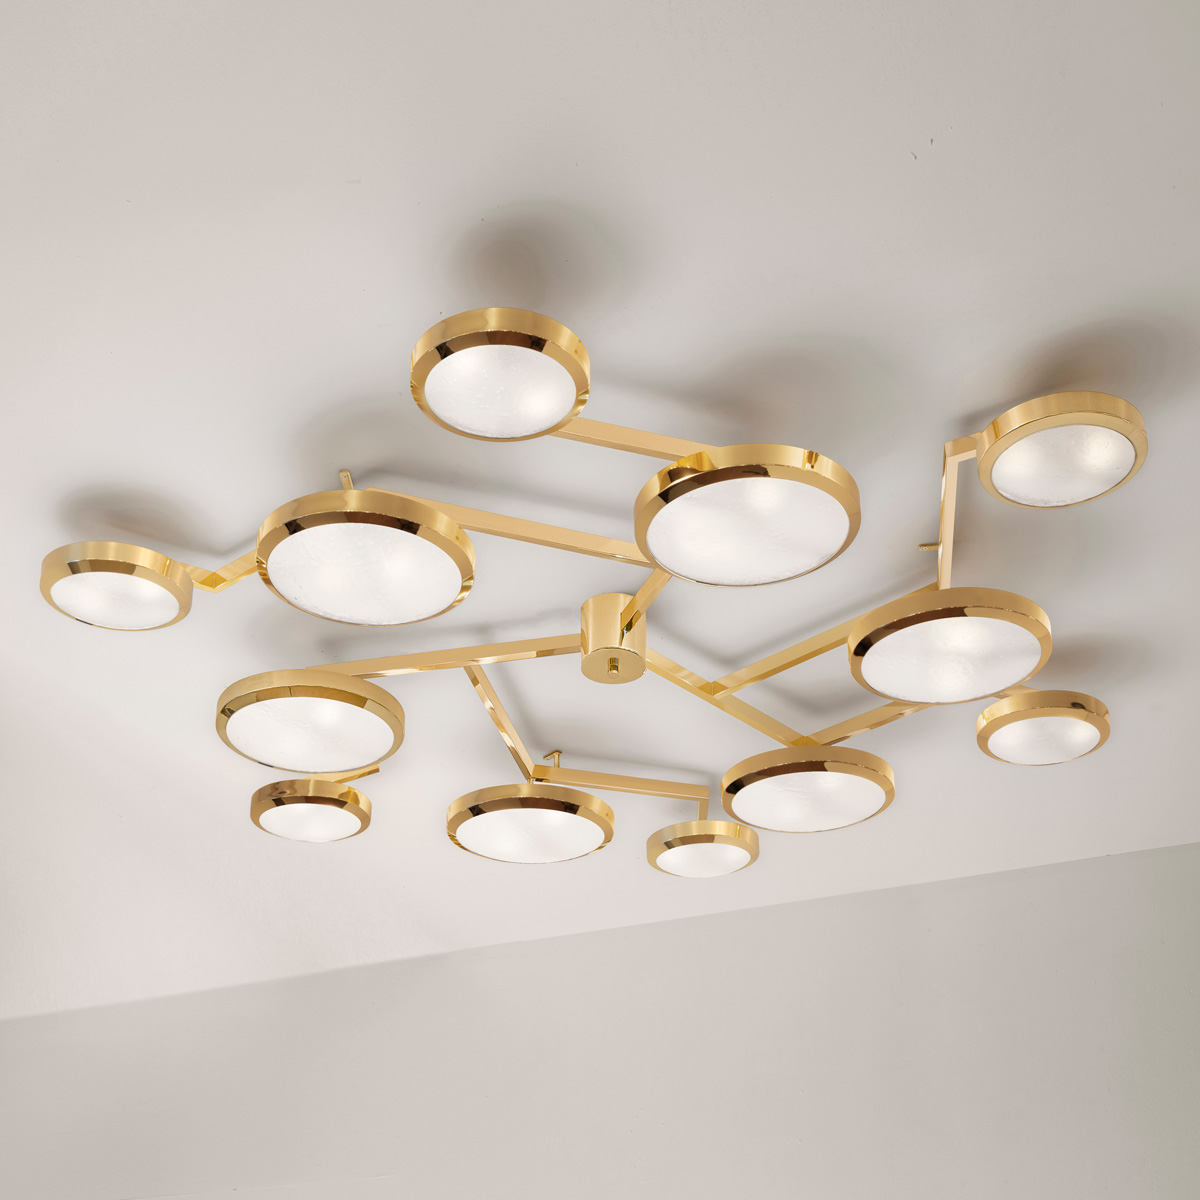 Nuvola ceiling light by gaspare asaro